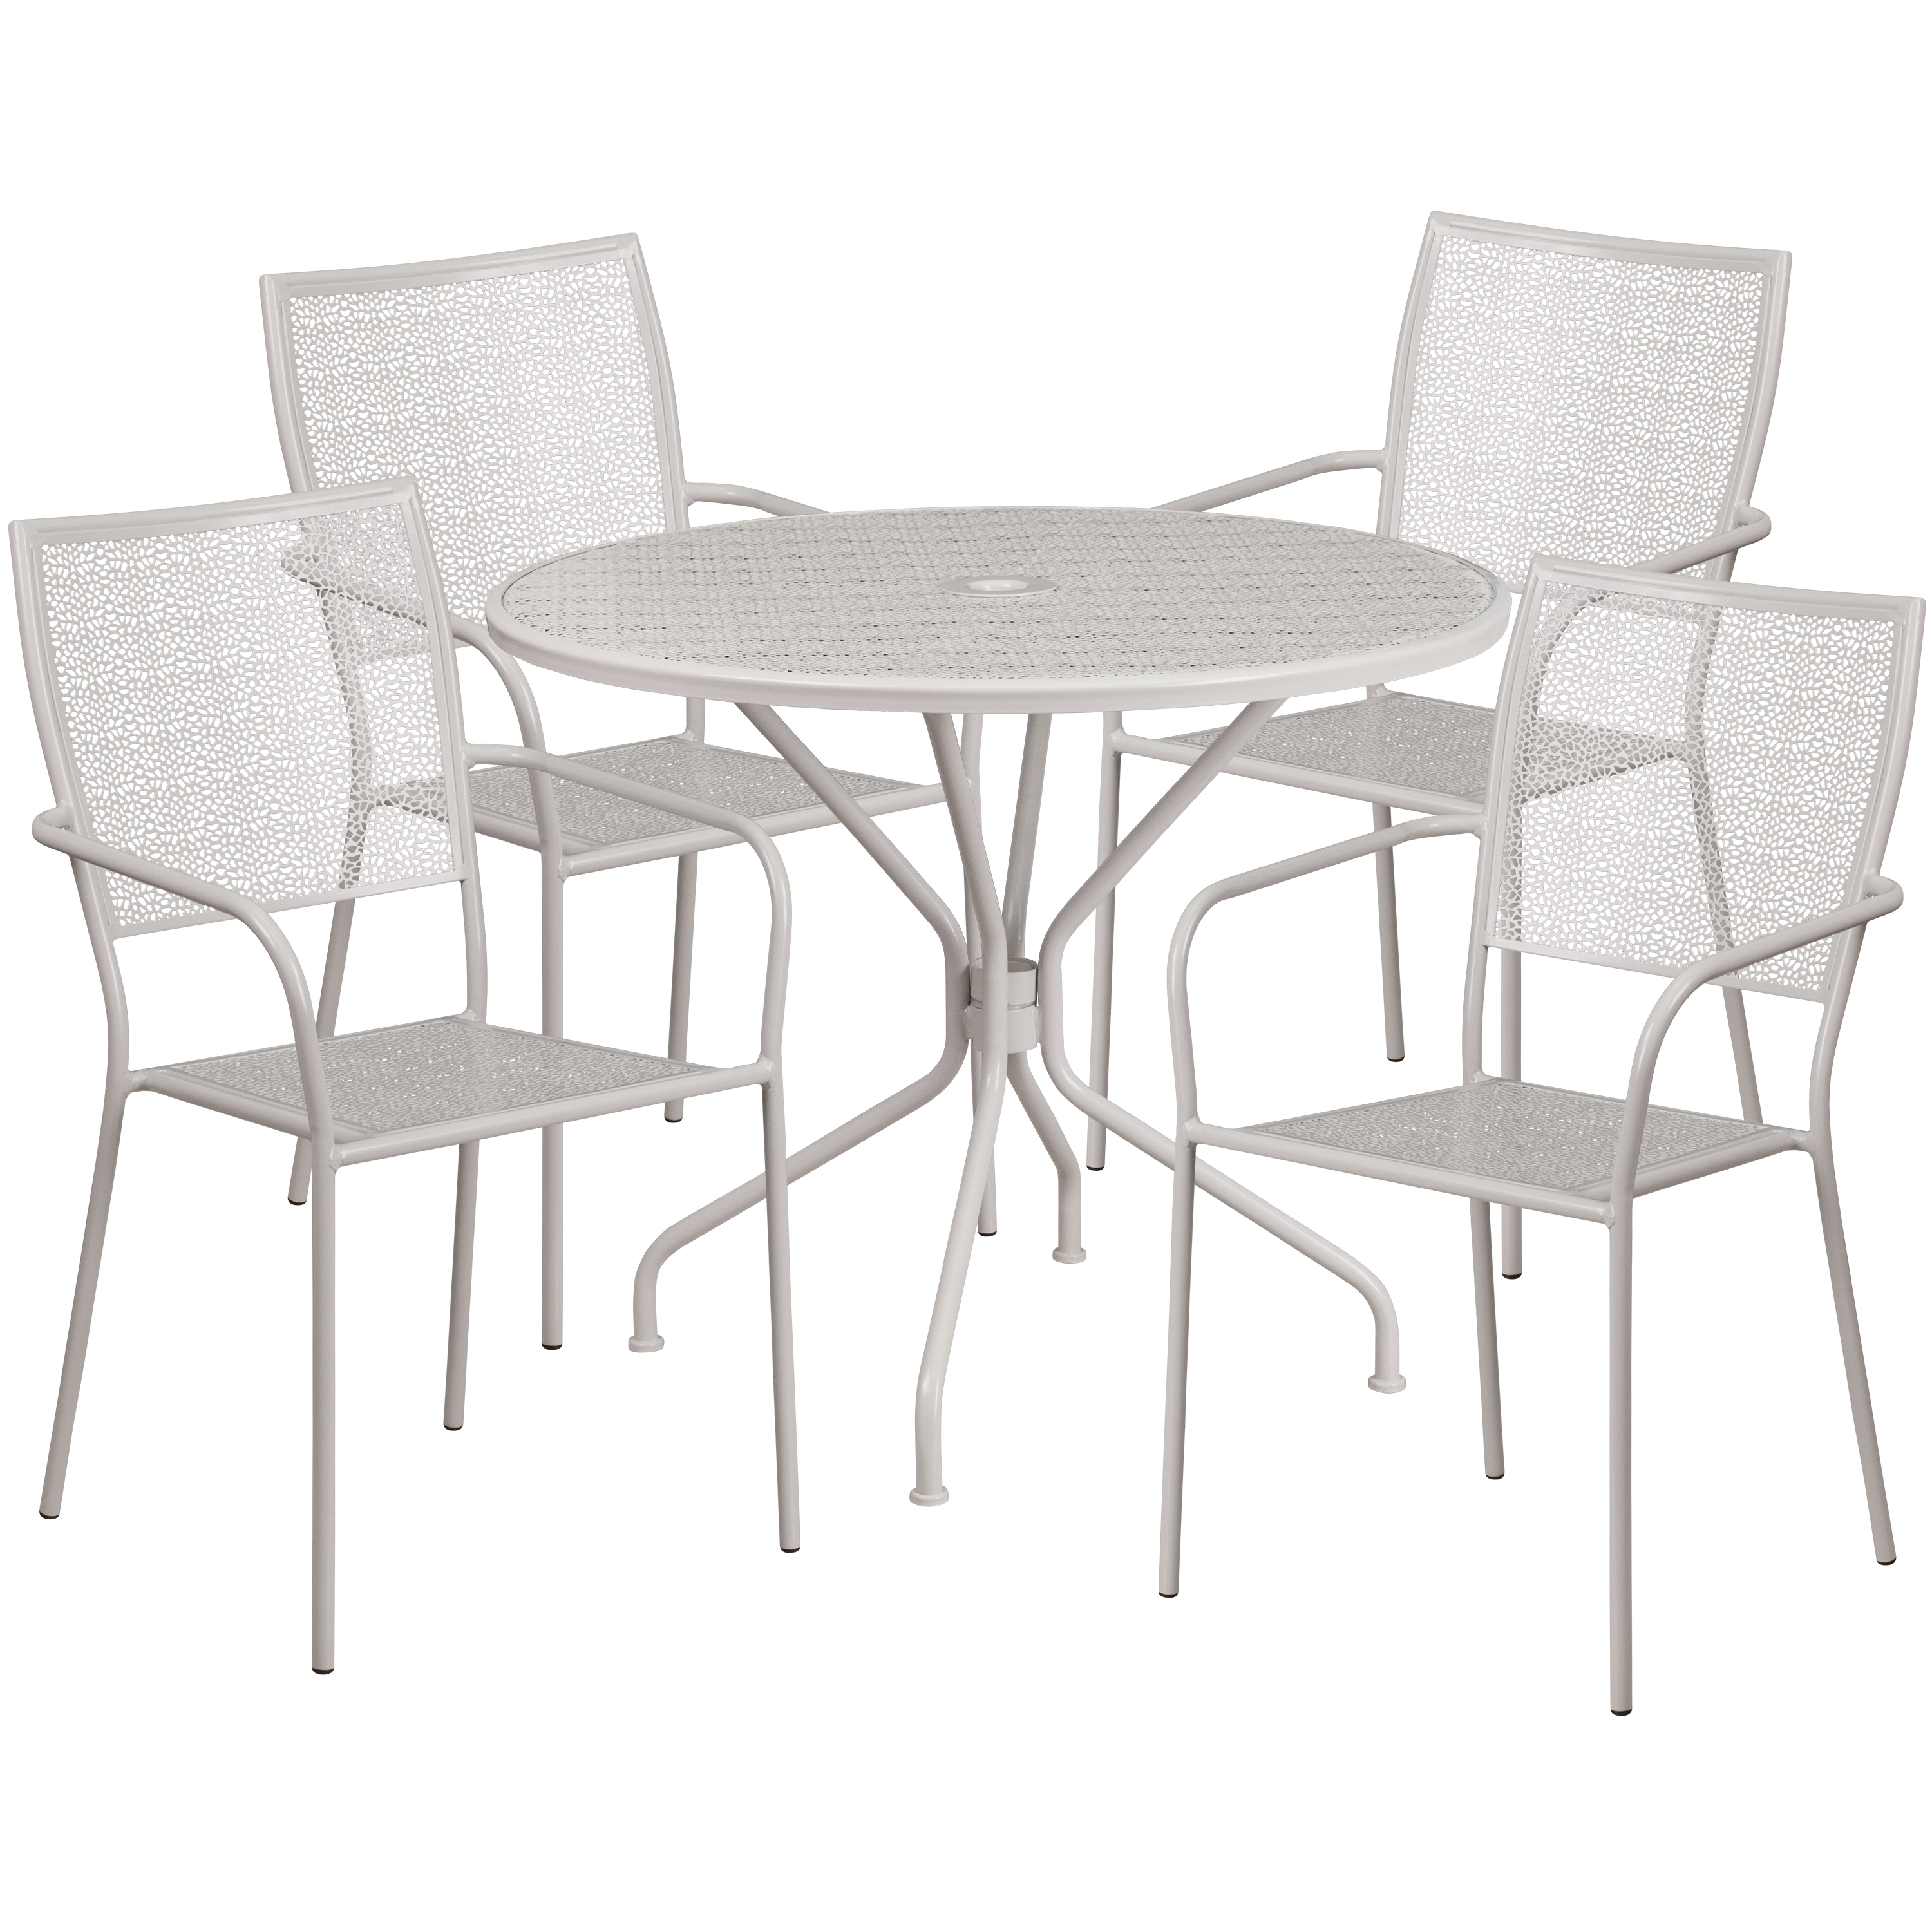 Flash Furniture Commercial Grade 35.25" Round Light Gray Indoor-Outdoor Steel Patio Table Set with 4 Square Back Chairs - image 2 of 5